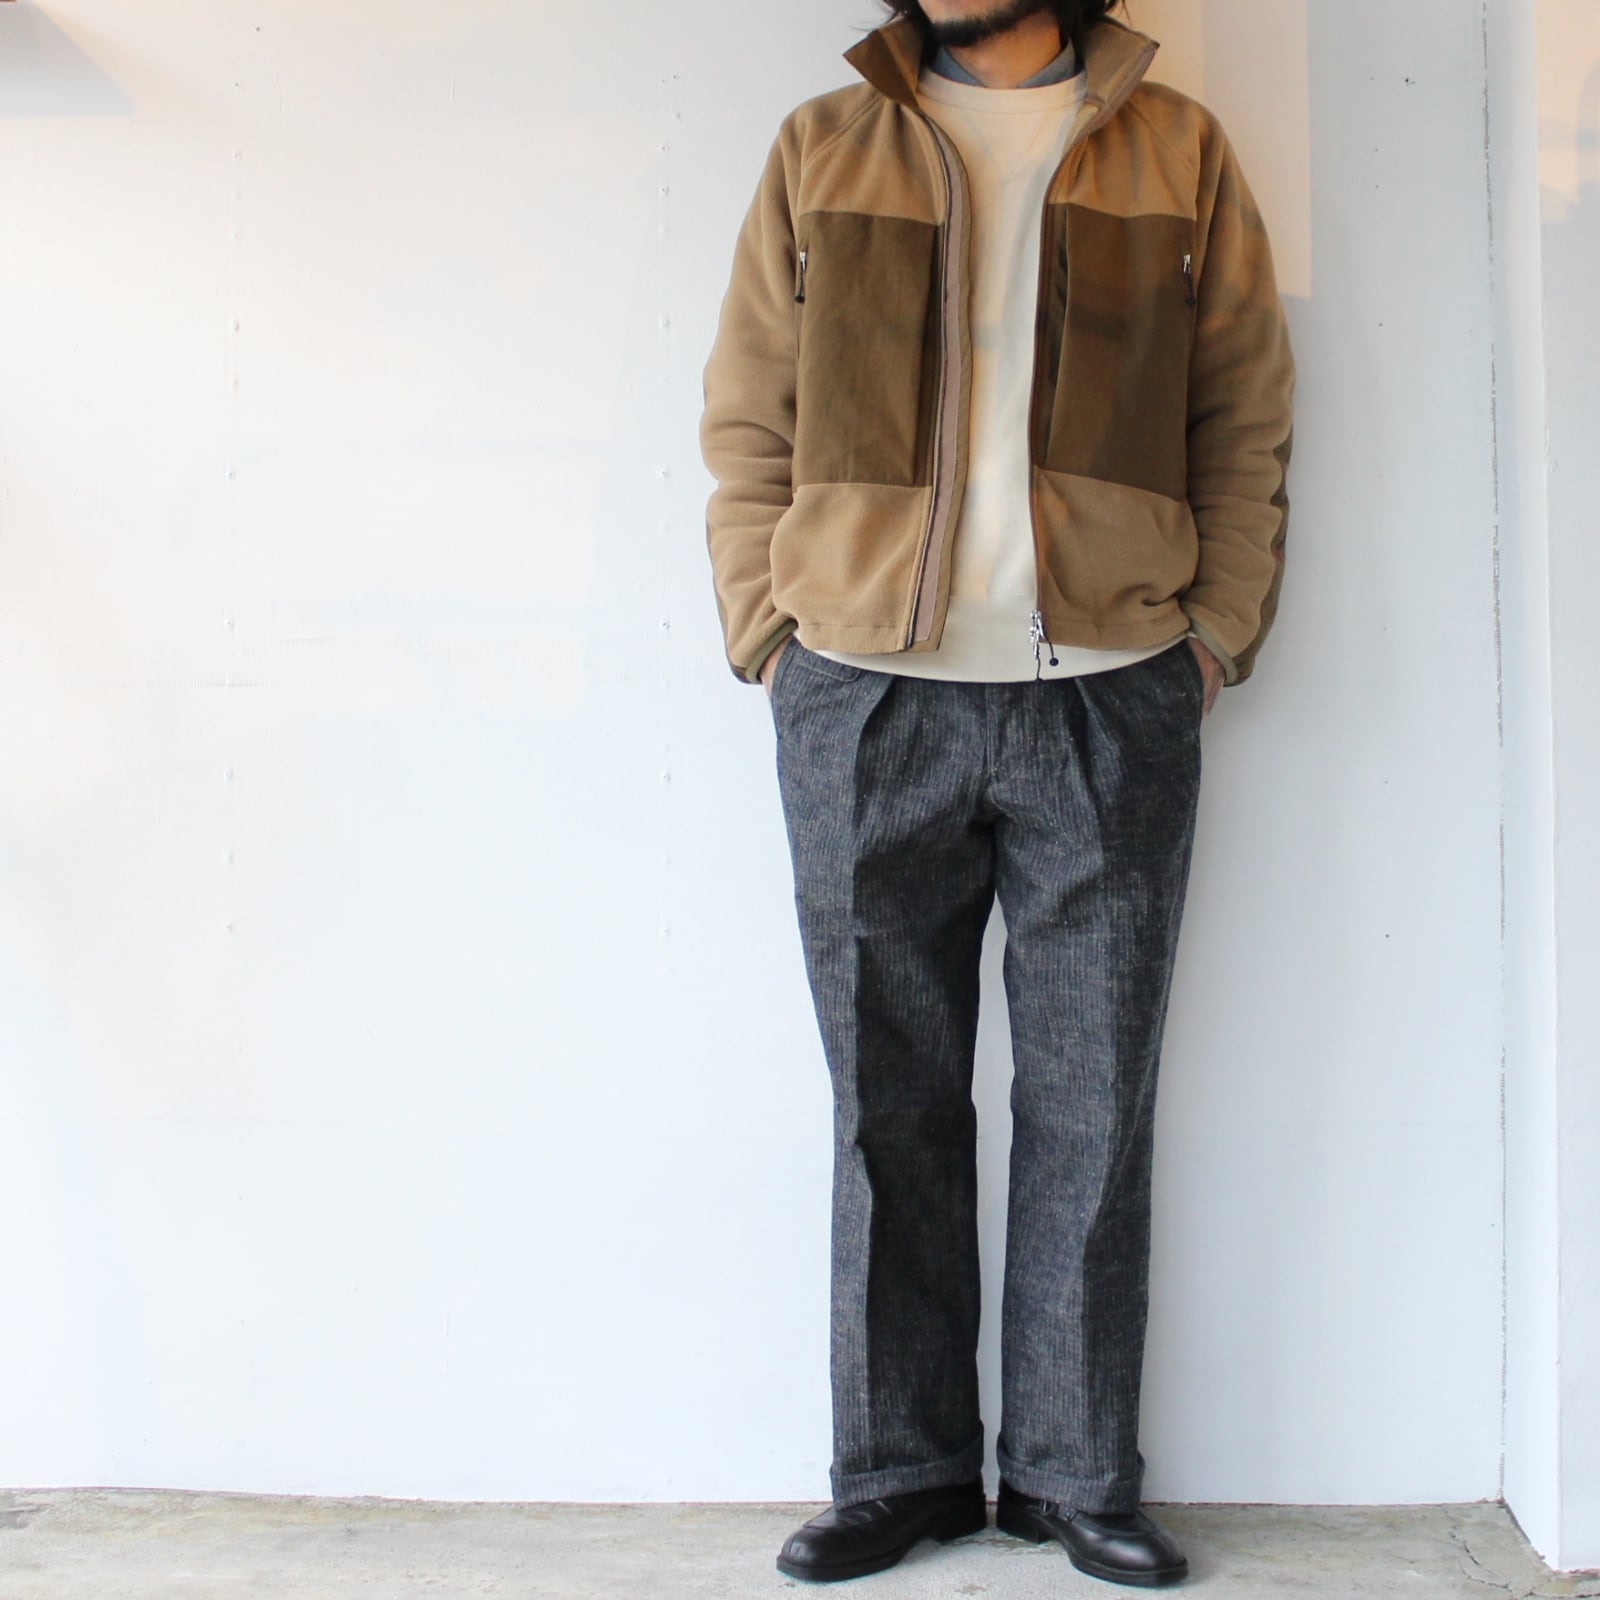 Orgueil オルゲイユ French Work Trousers ORB インディゴ   C.COUNTLY ONLINE  STORE｜メンズ・レディス・ユニセックス通販 powered by BASE